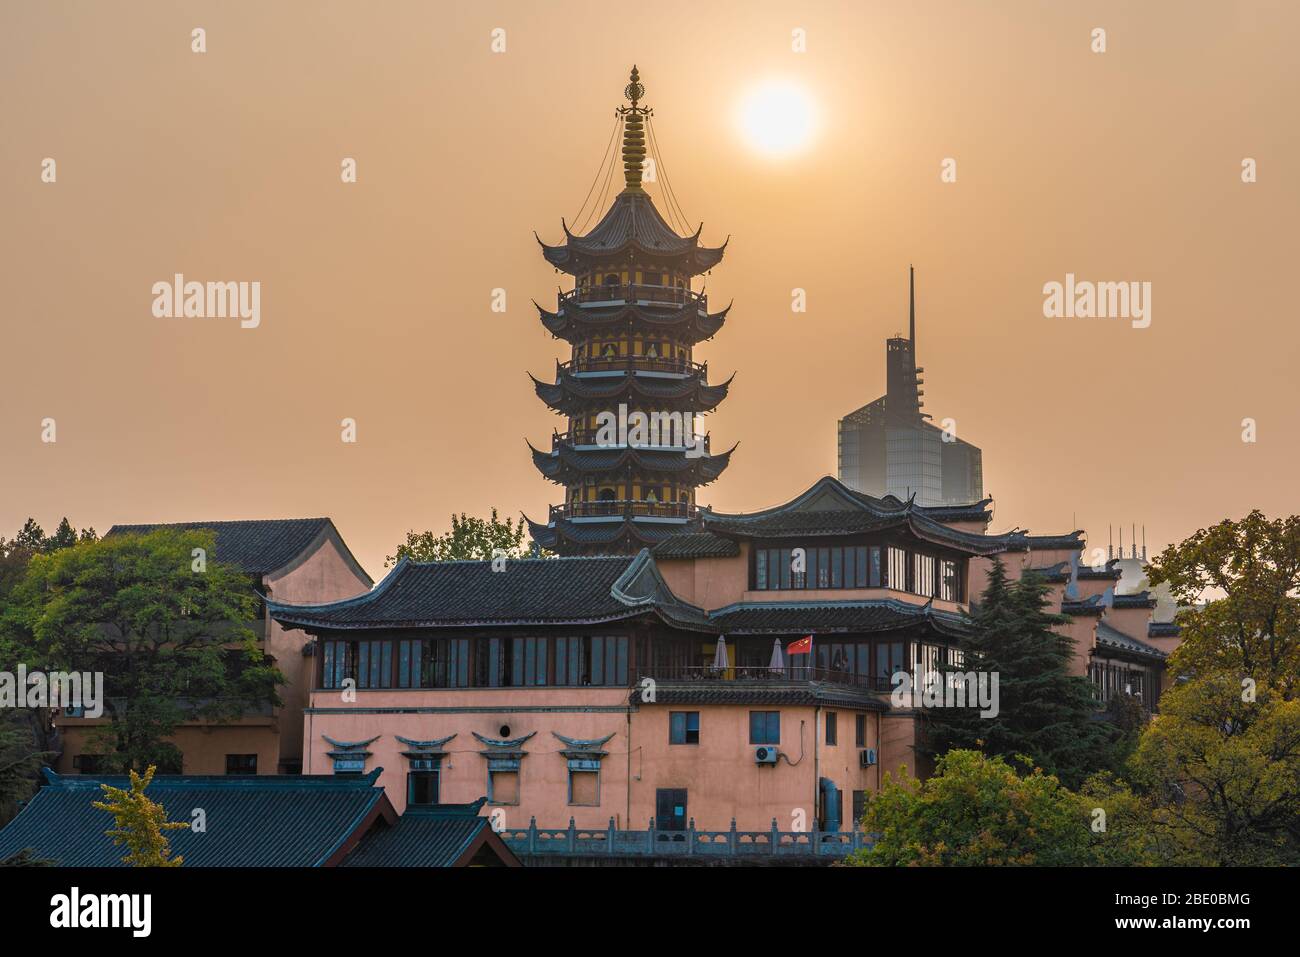 NANJING, CHINA - NOVEMBER 08: This is a view of the Jiming Buddhist Temple building during sunset on November 08, 2019 in Nanjing Stock Photo